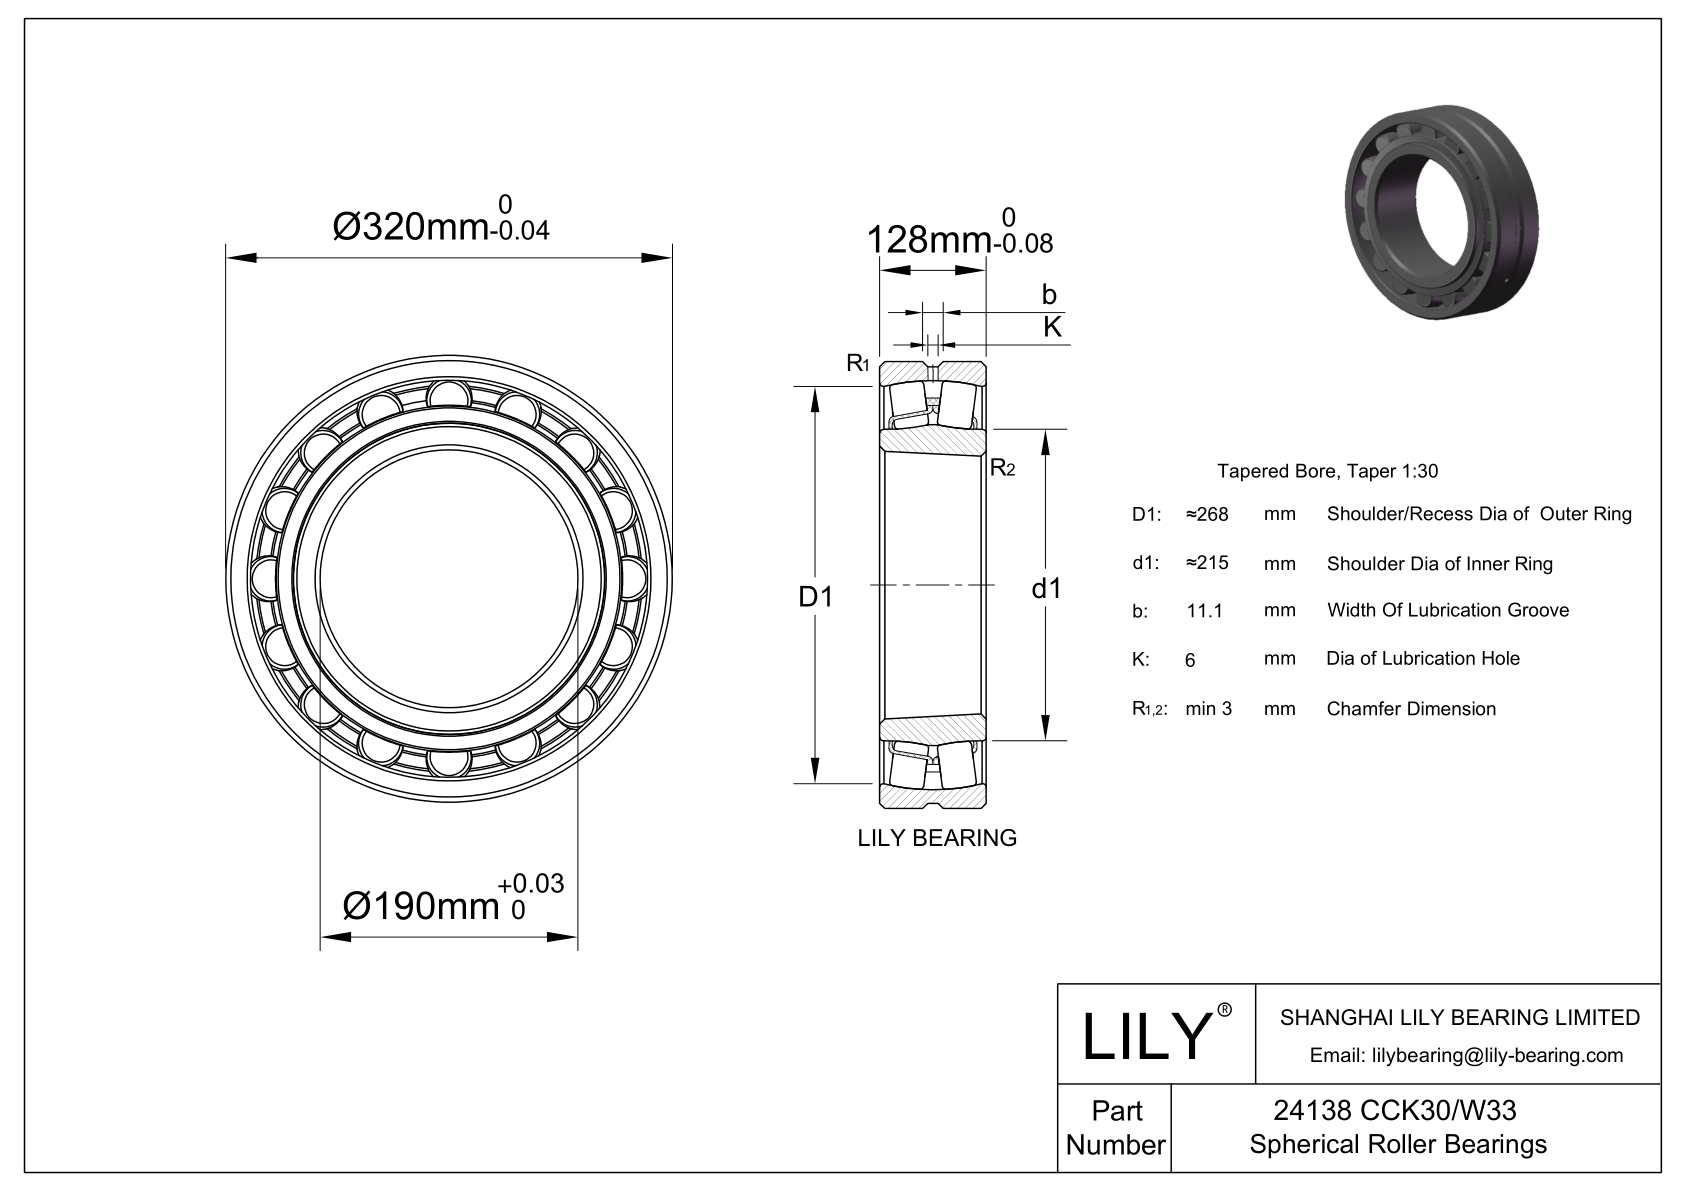 24138 CCK30/W33 Double Row Spherical Roller Bearing cad drawing